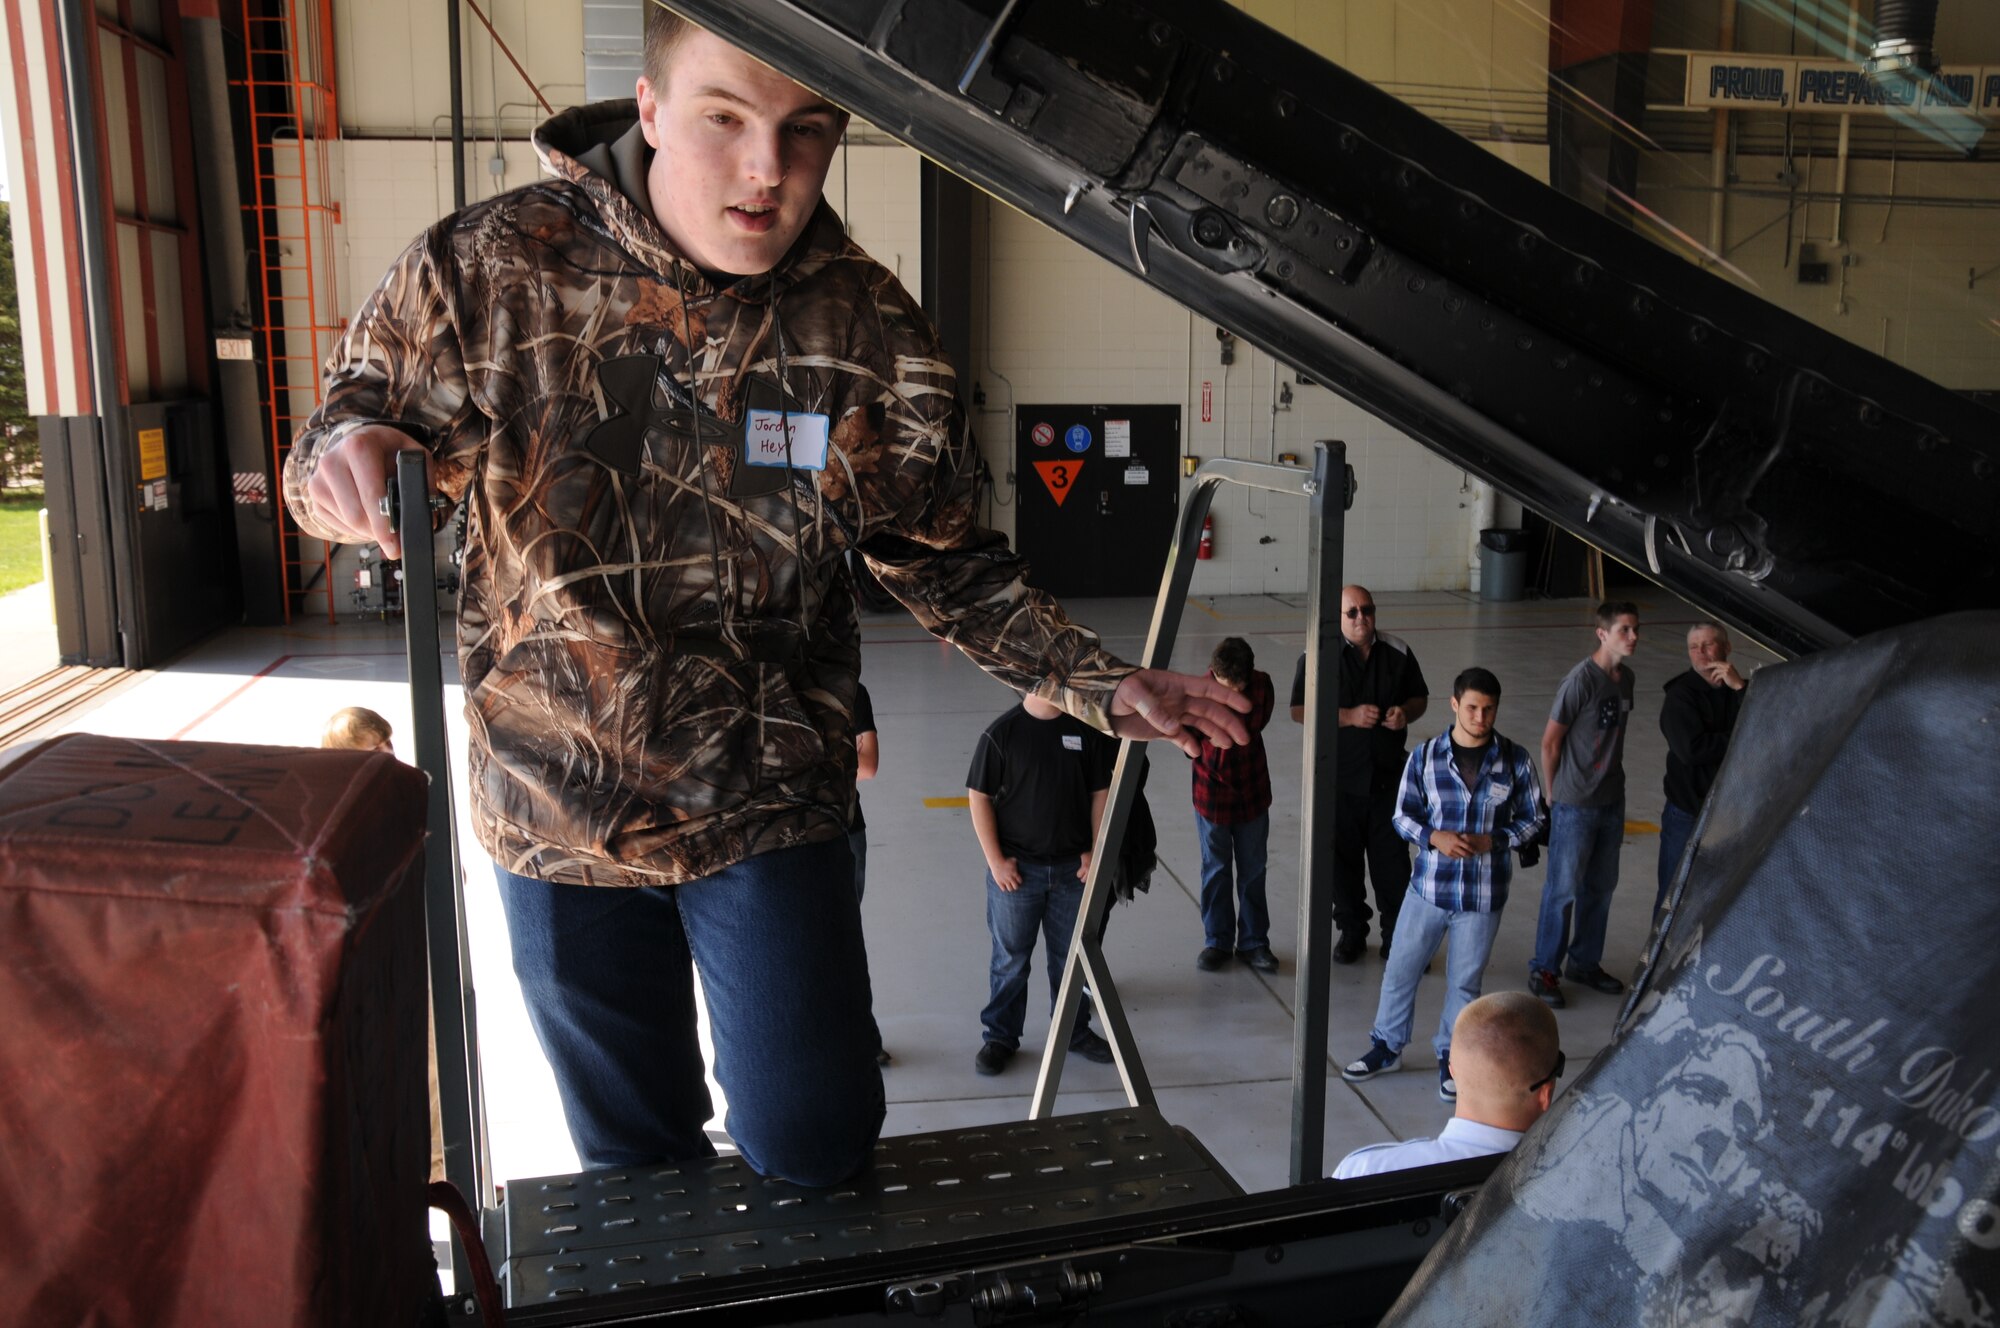 Jordon Heyd, a junior from Canistota, S.D., looks inside an F-16 Fighting Falcon cockpit during the 2015 South Dakota Air National Guard Career Day at Joe Foss Field, S.D., April 29, 2015. The event was held to showcase the many careers within the South Dakota Air National Guard to area high school seniors and juniors.  (National Guard photo by Senior Airman Duane Duimstra/Released)